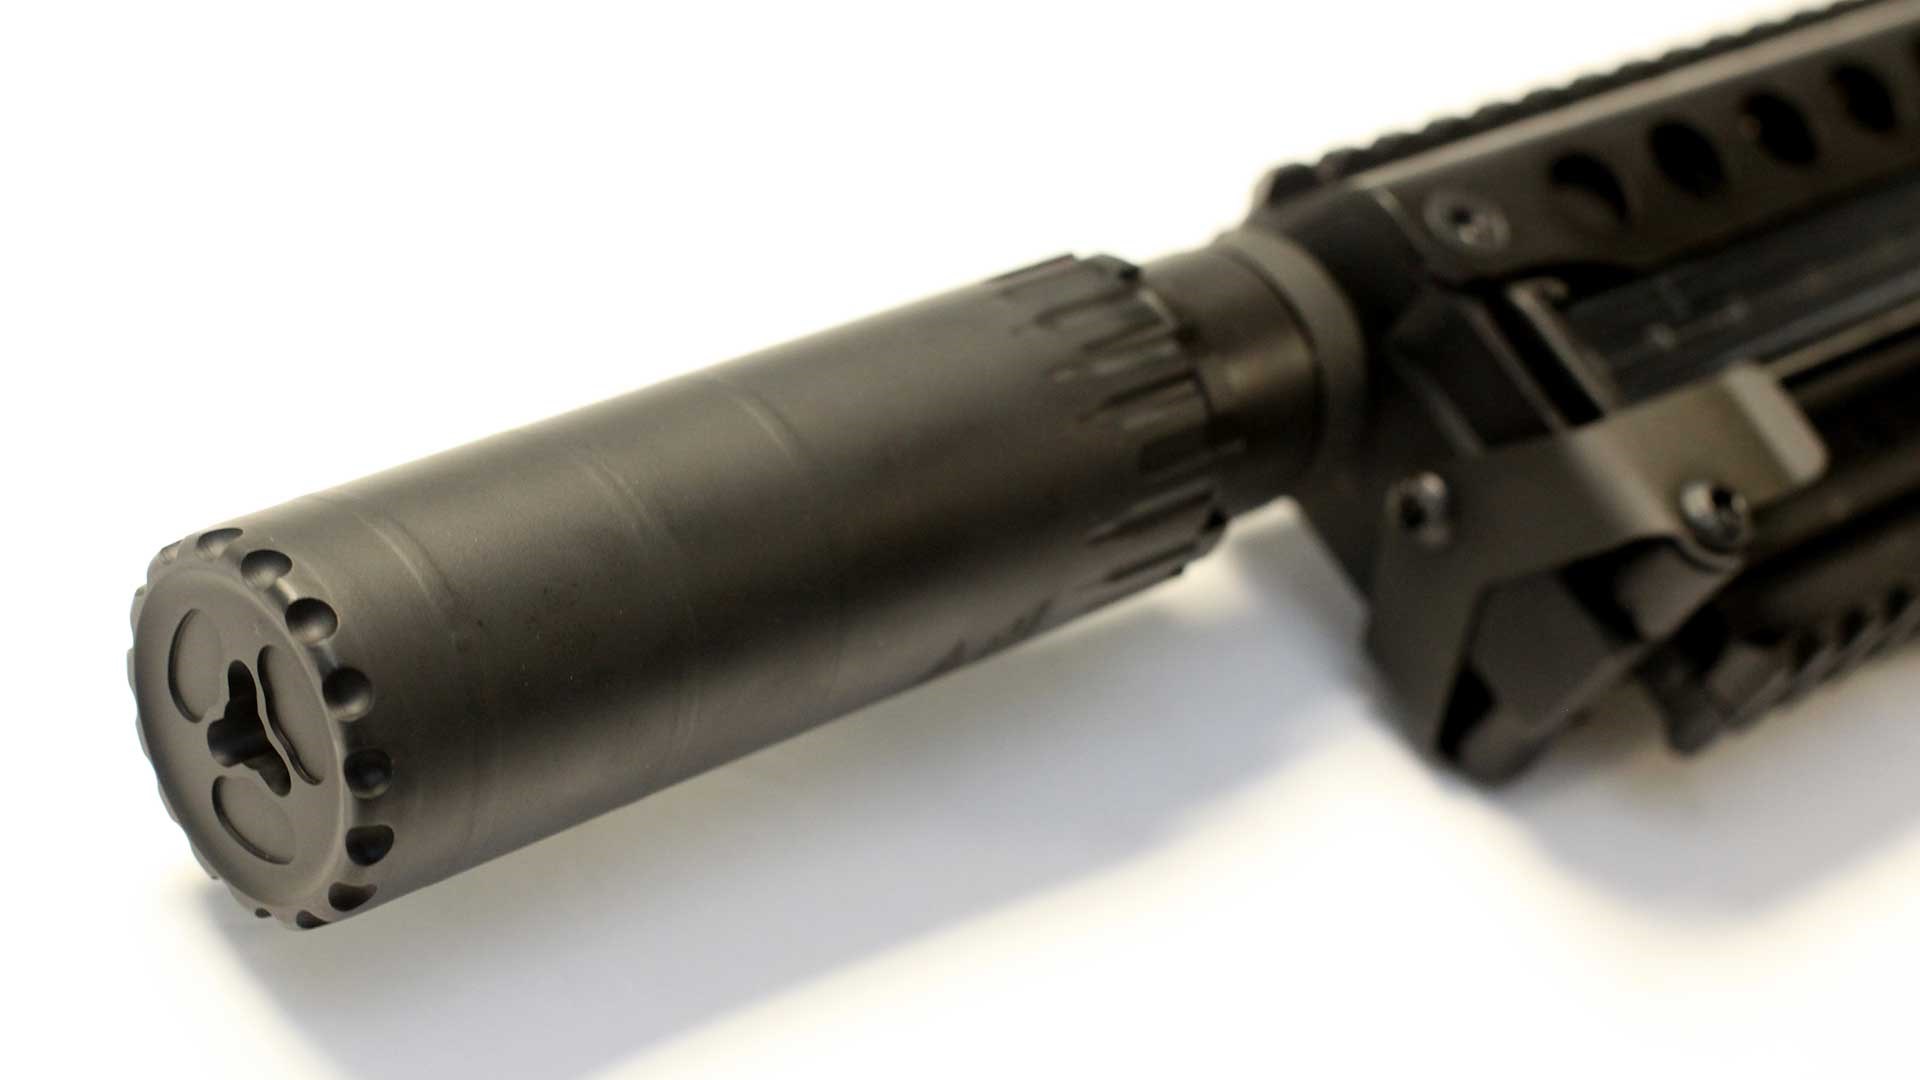 A black suppressor mounted on the muzzle of a Kel-Tec P50.